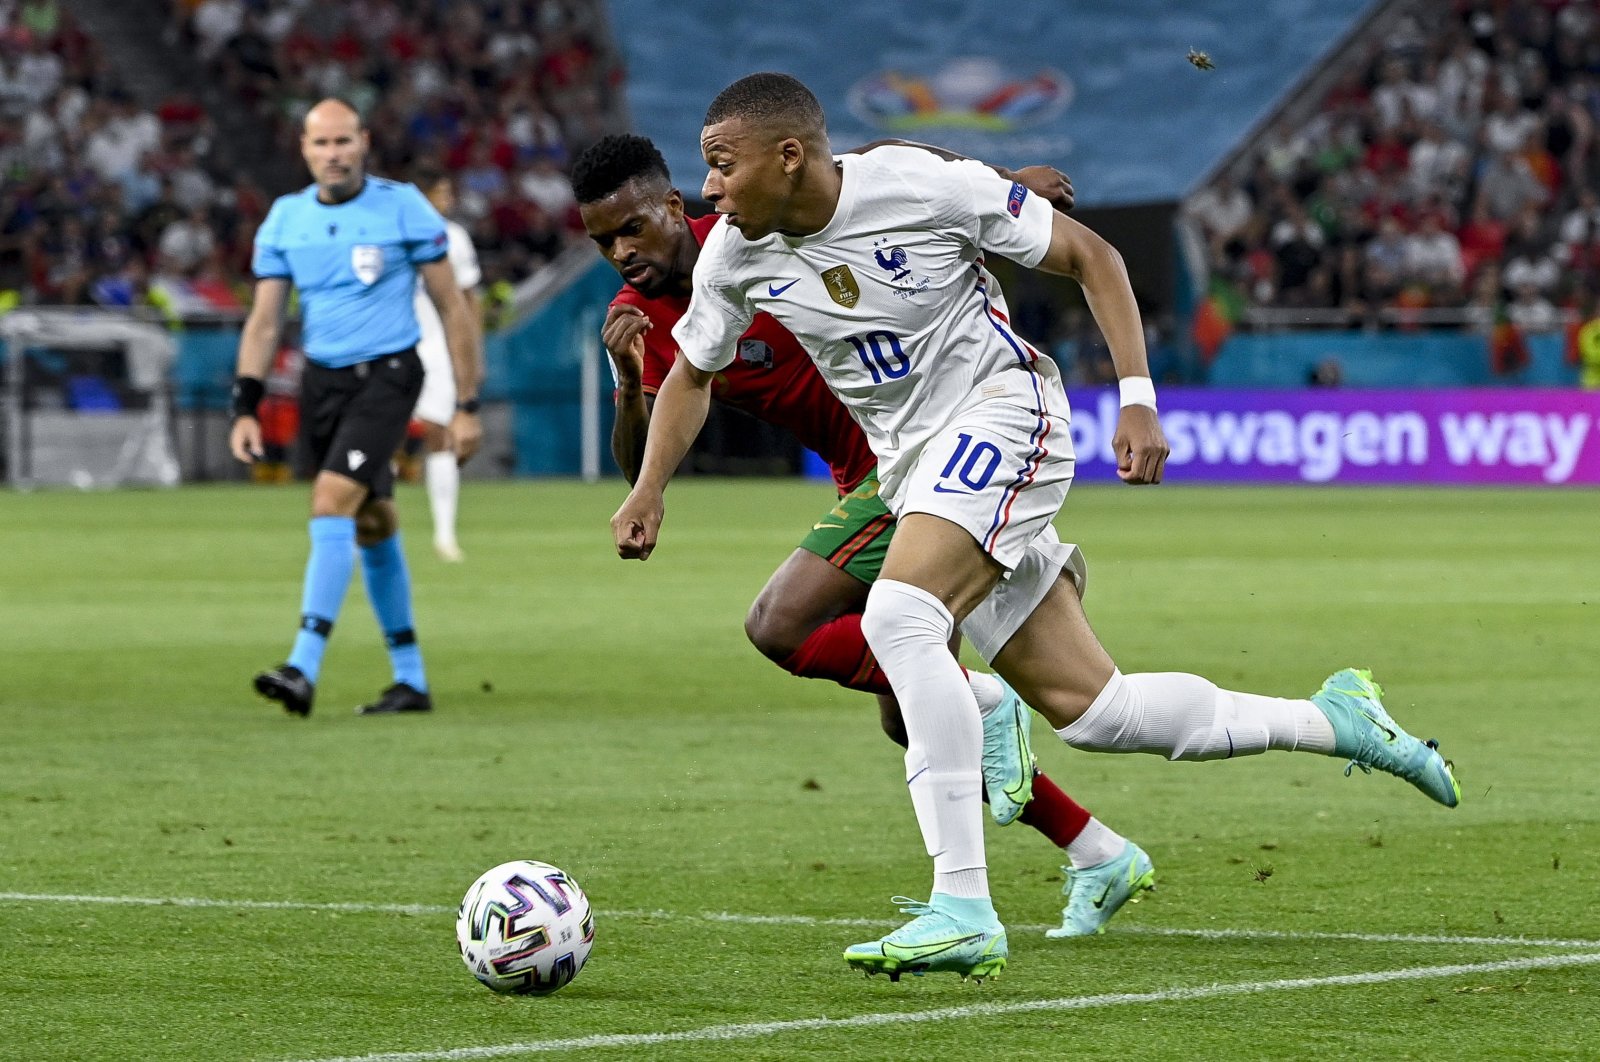 France's Kylian Mbappe (R) is challenged by Portugal's Nelson Semedo (L) for the ball during their Euro 2020 Group F match at Puskas Arena in Budapest, Hungary, June 23, 2021. (EPA Photo)